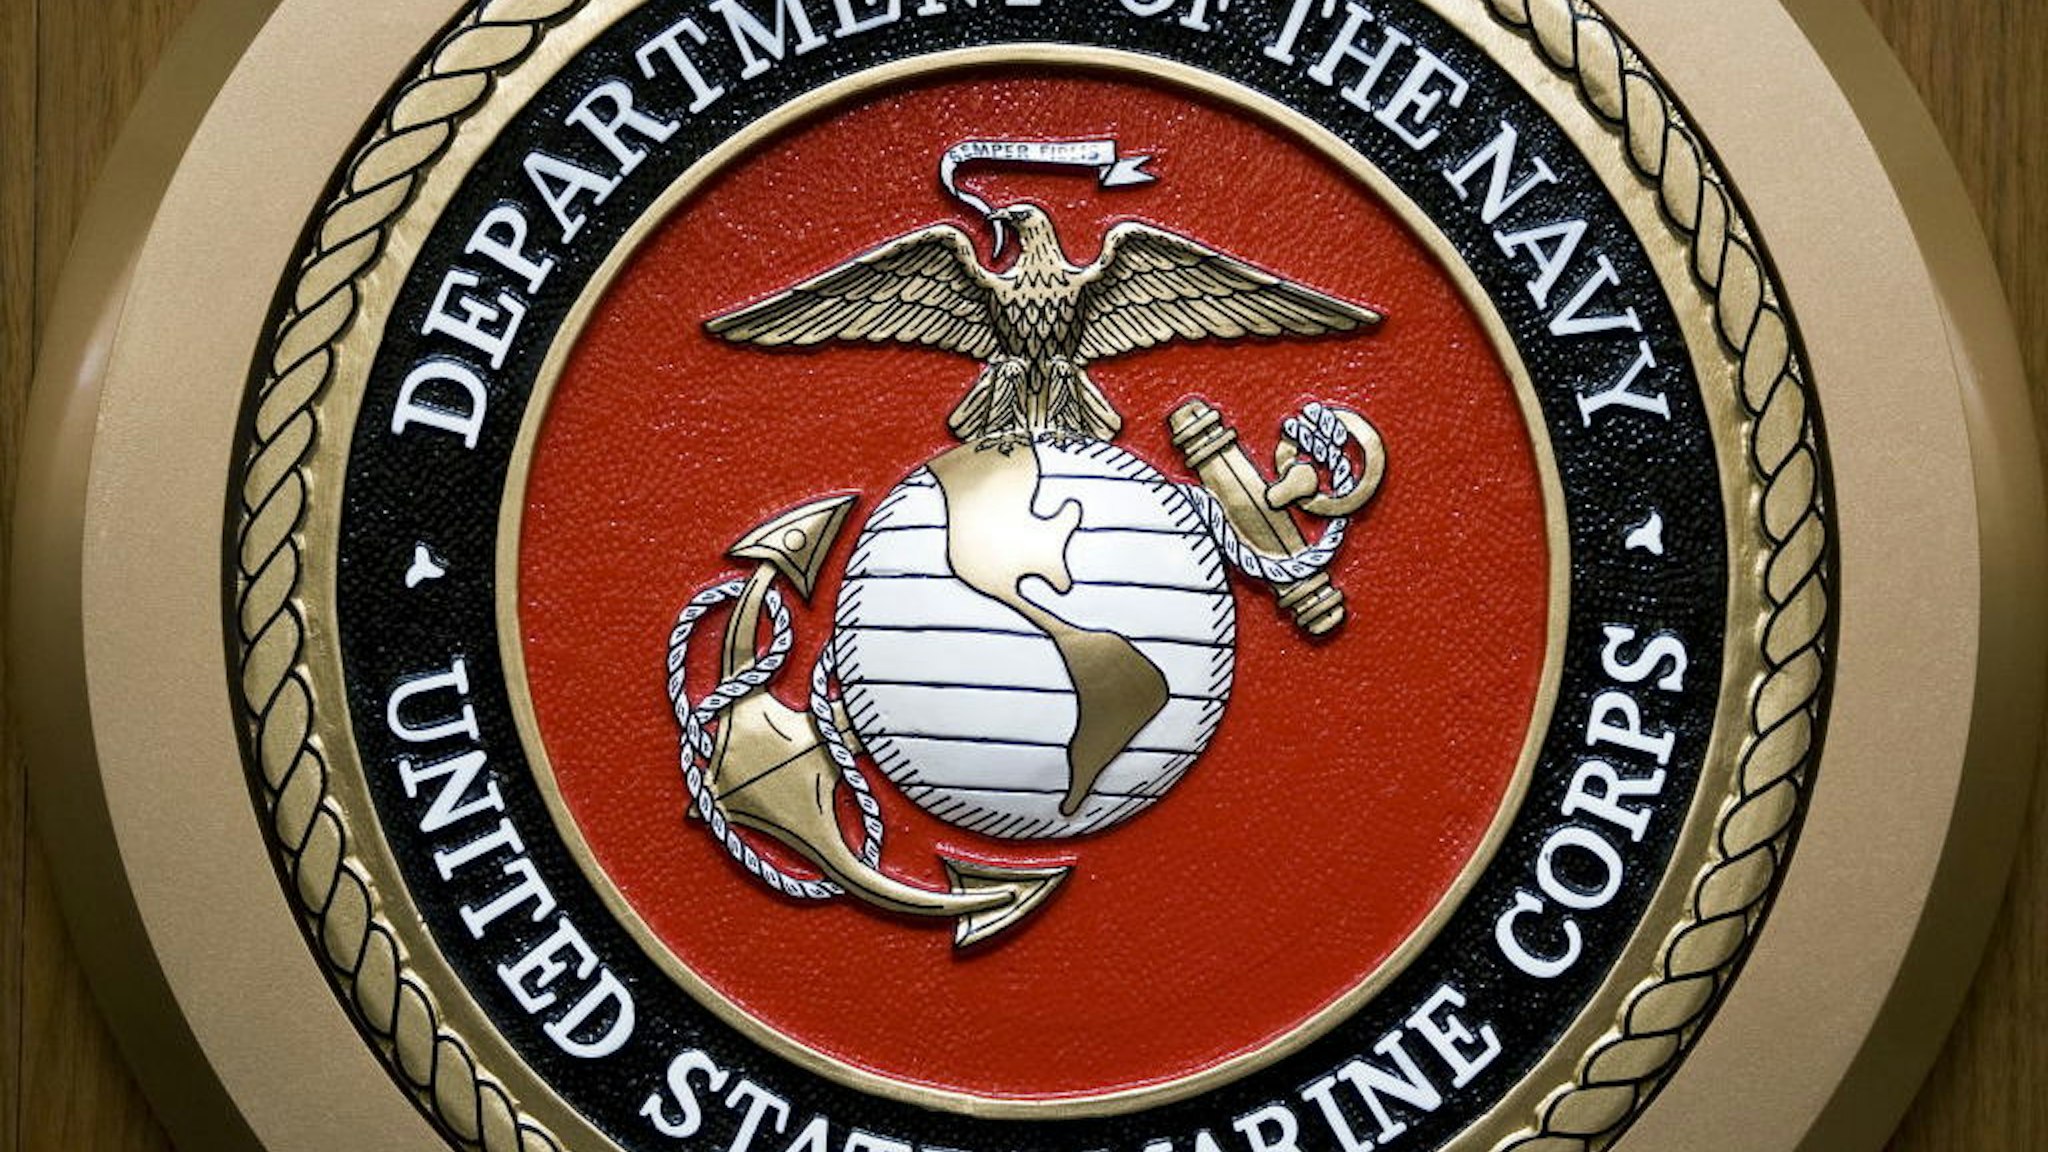 The US Department of the Navy, US Marine Corps, seal hangs on the wall February 24, 2009, at the Pentagon in Washington,DC. AFP Photo/Paul J. Richards / AFP PHOTO / Paul J. RICHARDS (Photo credit should read PAUL J. RICHARDS/AFP via Getty Images)